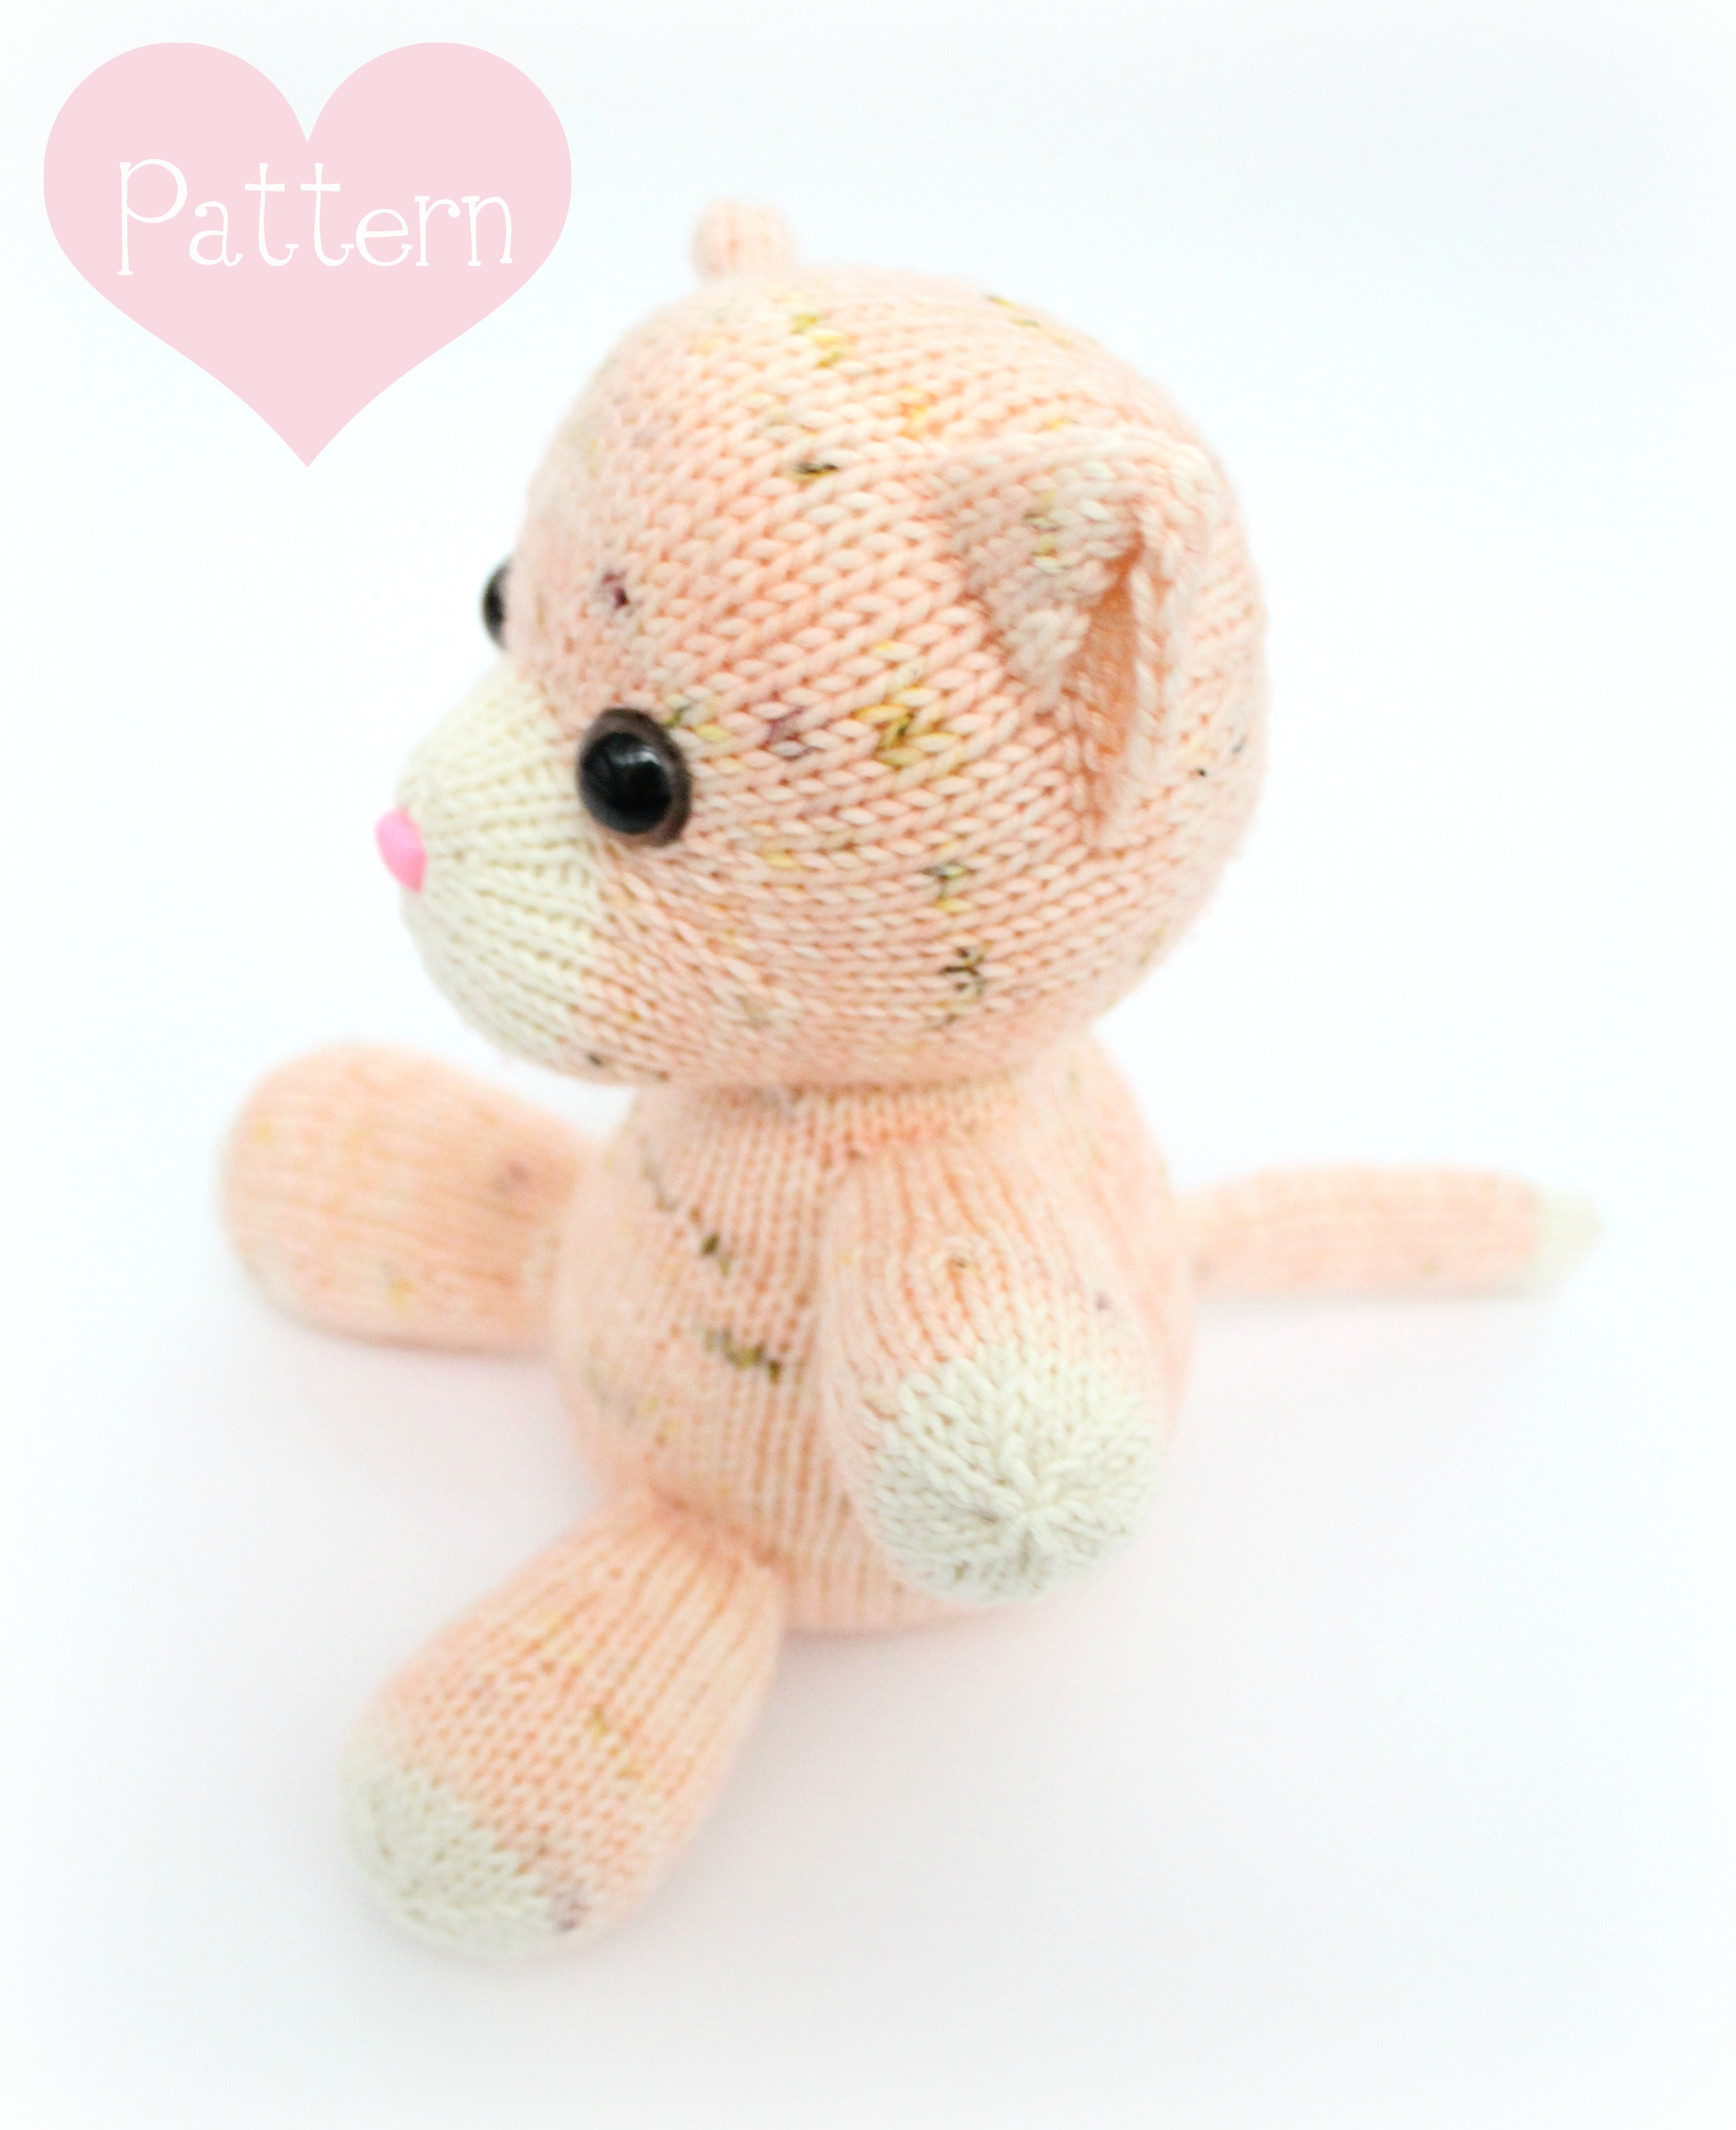 Knitting Patterns For Cat Toys Free Knitting Pattern Peaches The Kitten Knitted Toy Cat Pattern